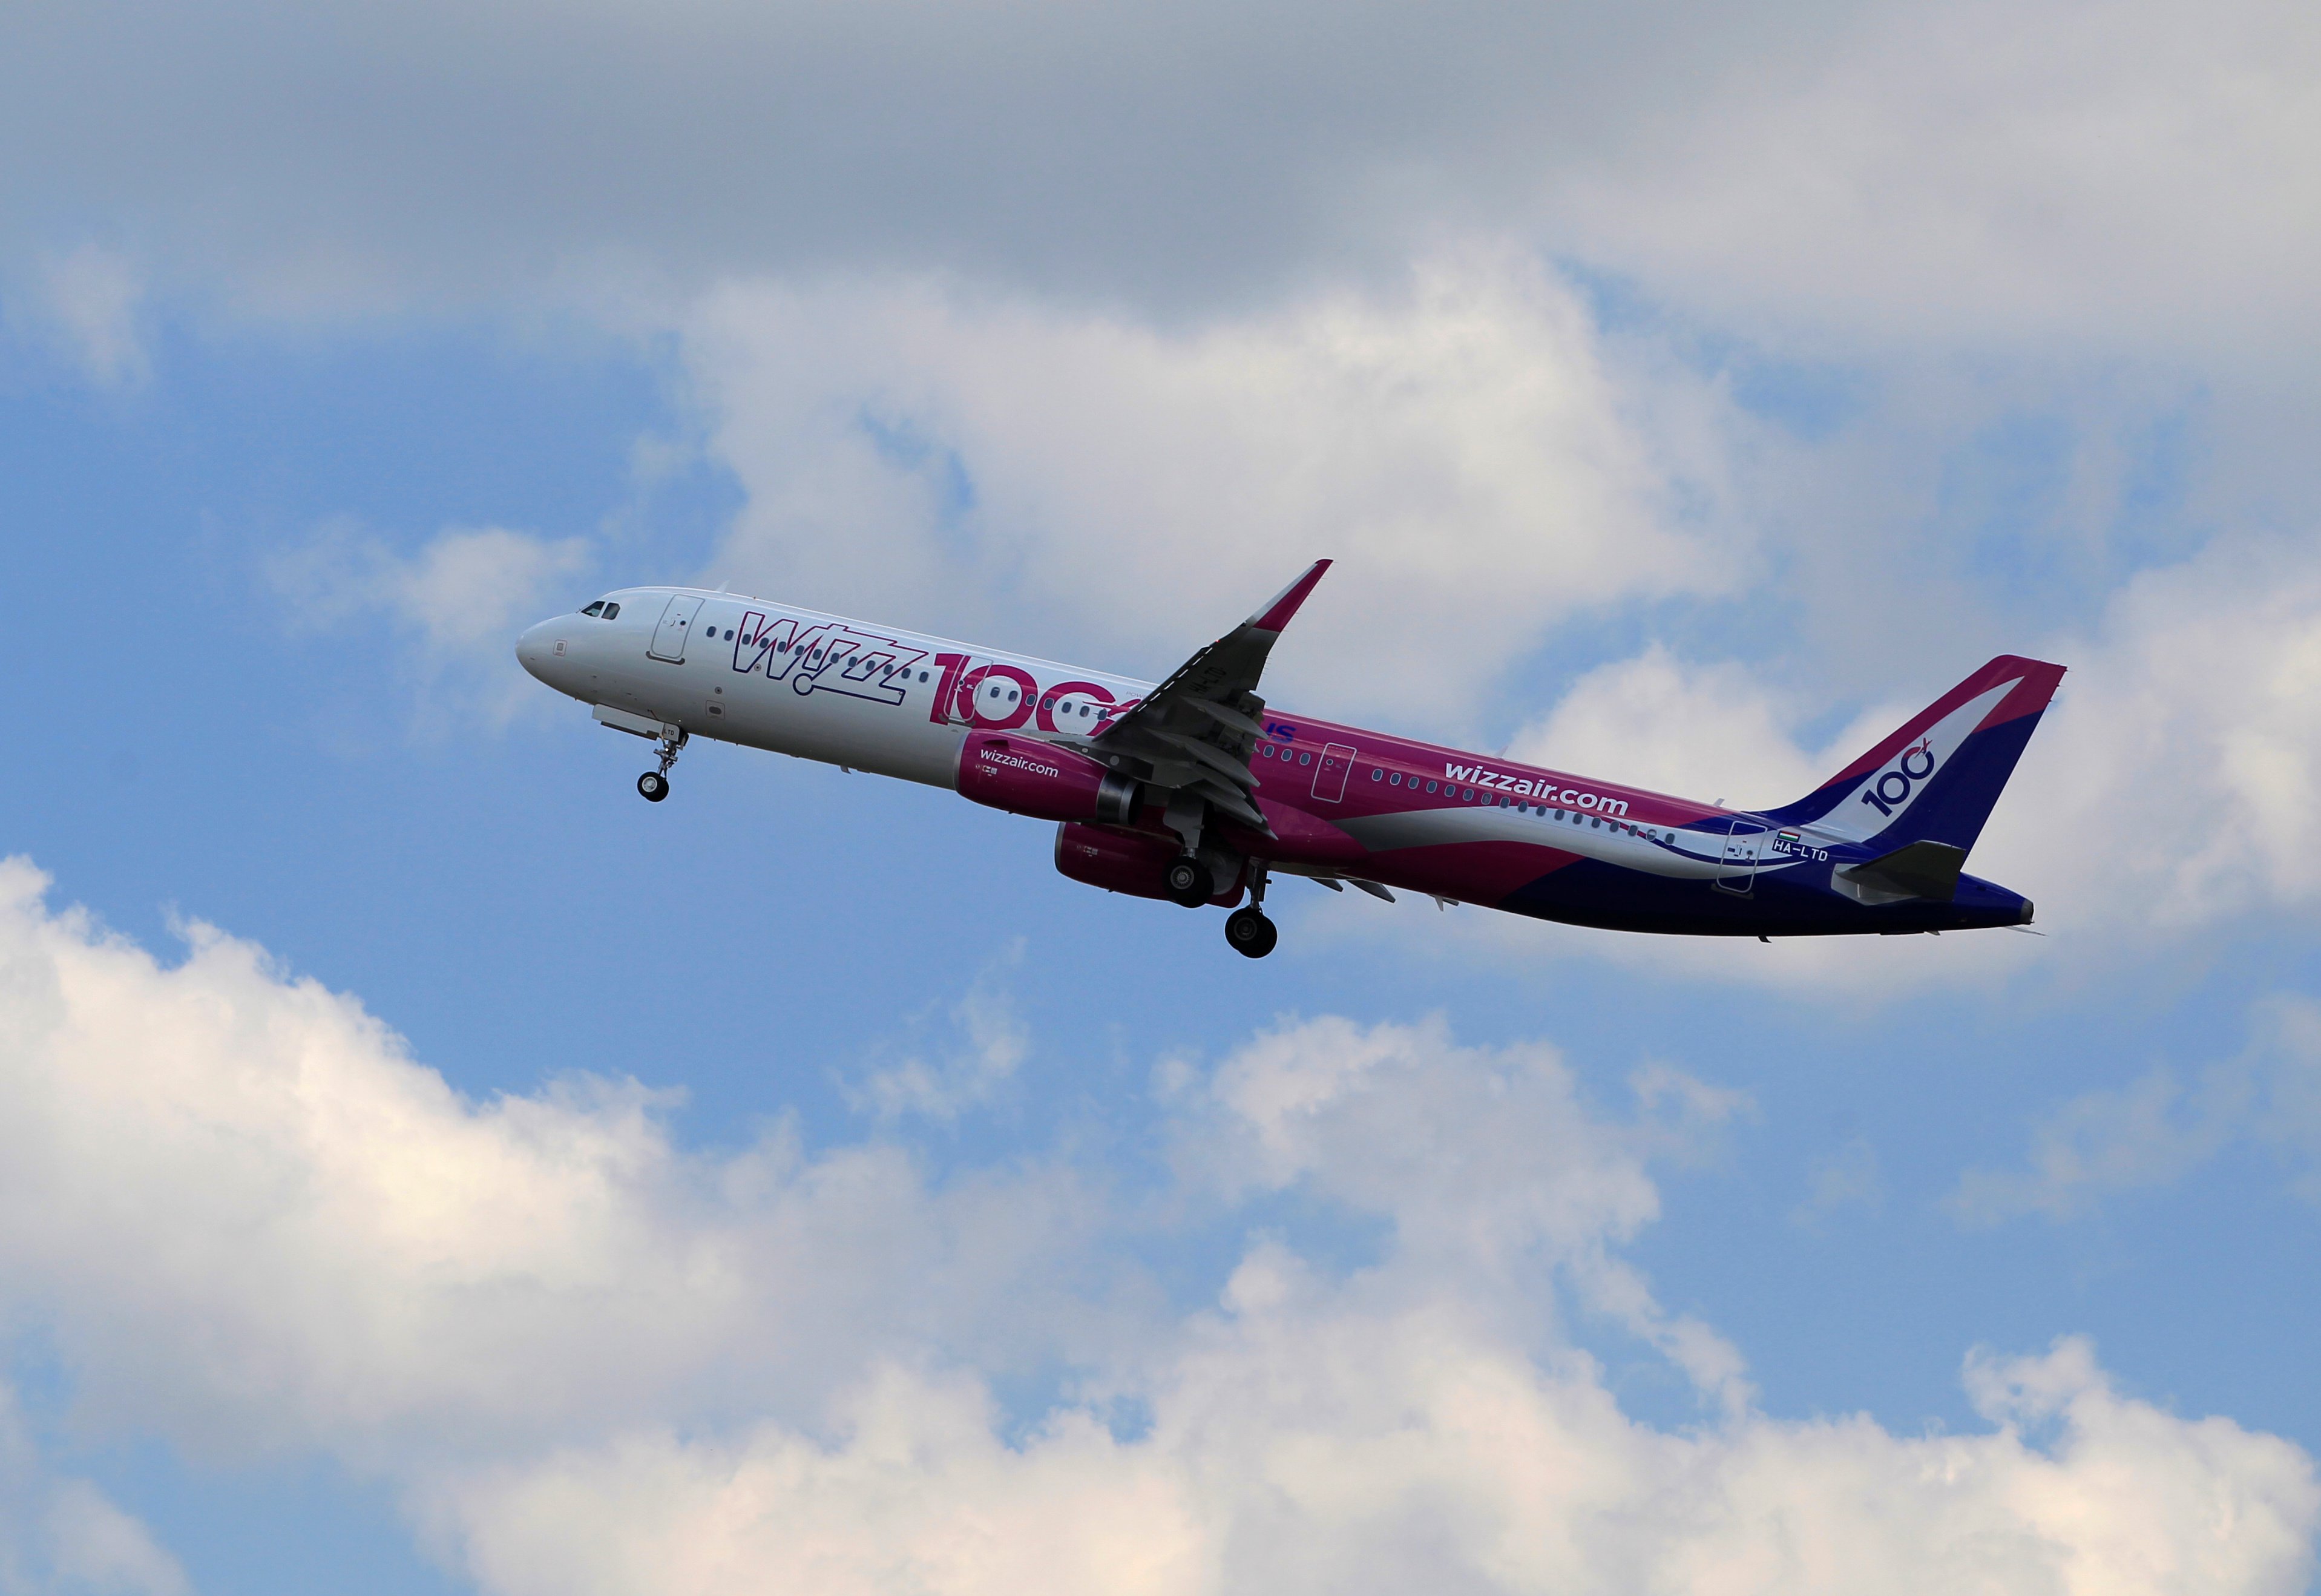 A Wizz Air Airbus A321 aircraft takes off after the unveiling ceremony of the 100th plane of its fleet at Budapest Airport